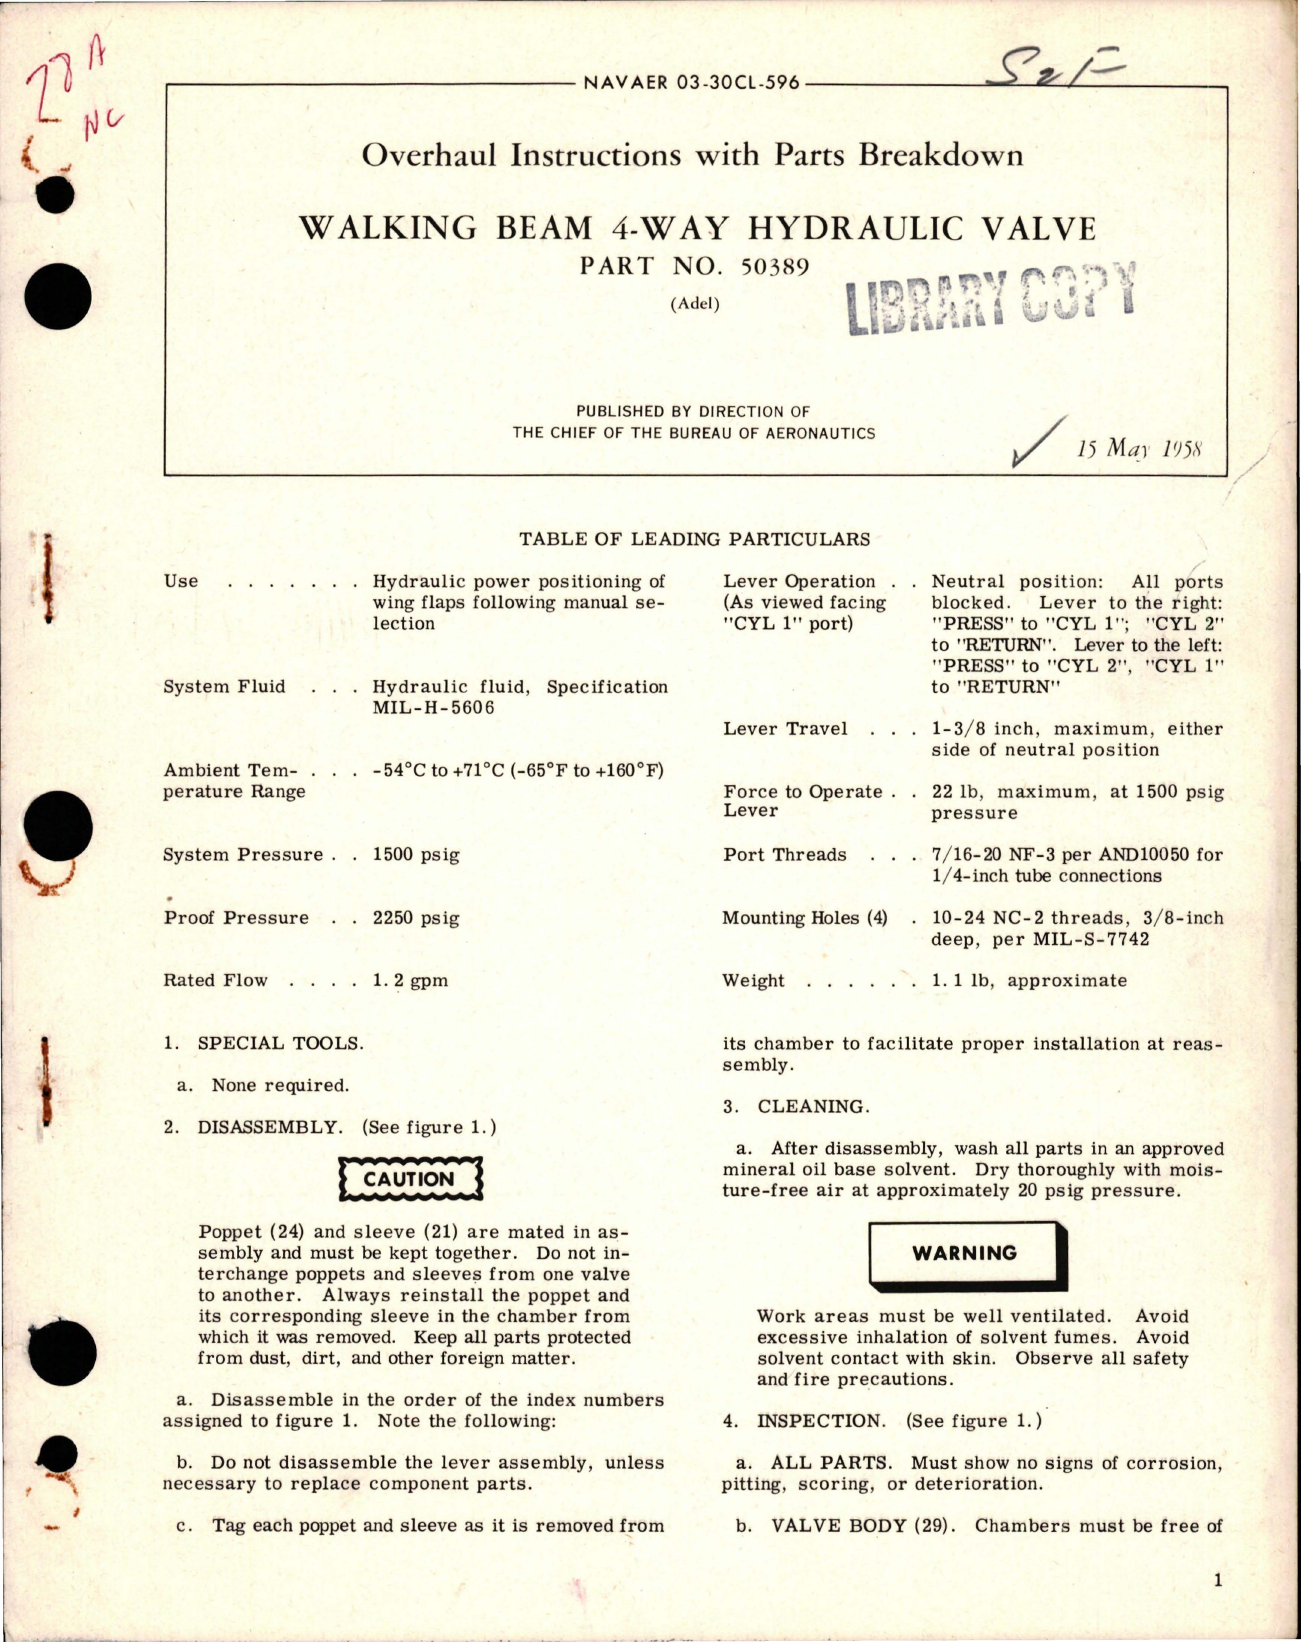 Sample page 1 from AirCorps Library document: Overhaul Instructions with Parts for 4-Way Walking Beam Hydraulic Valve - Part 50389 